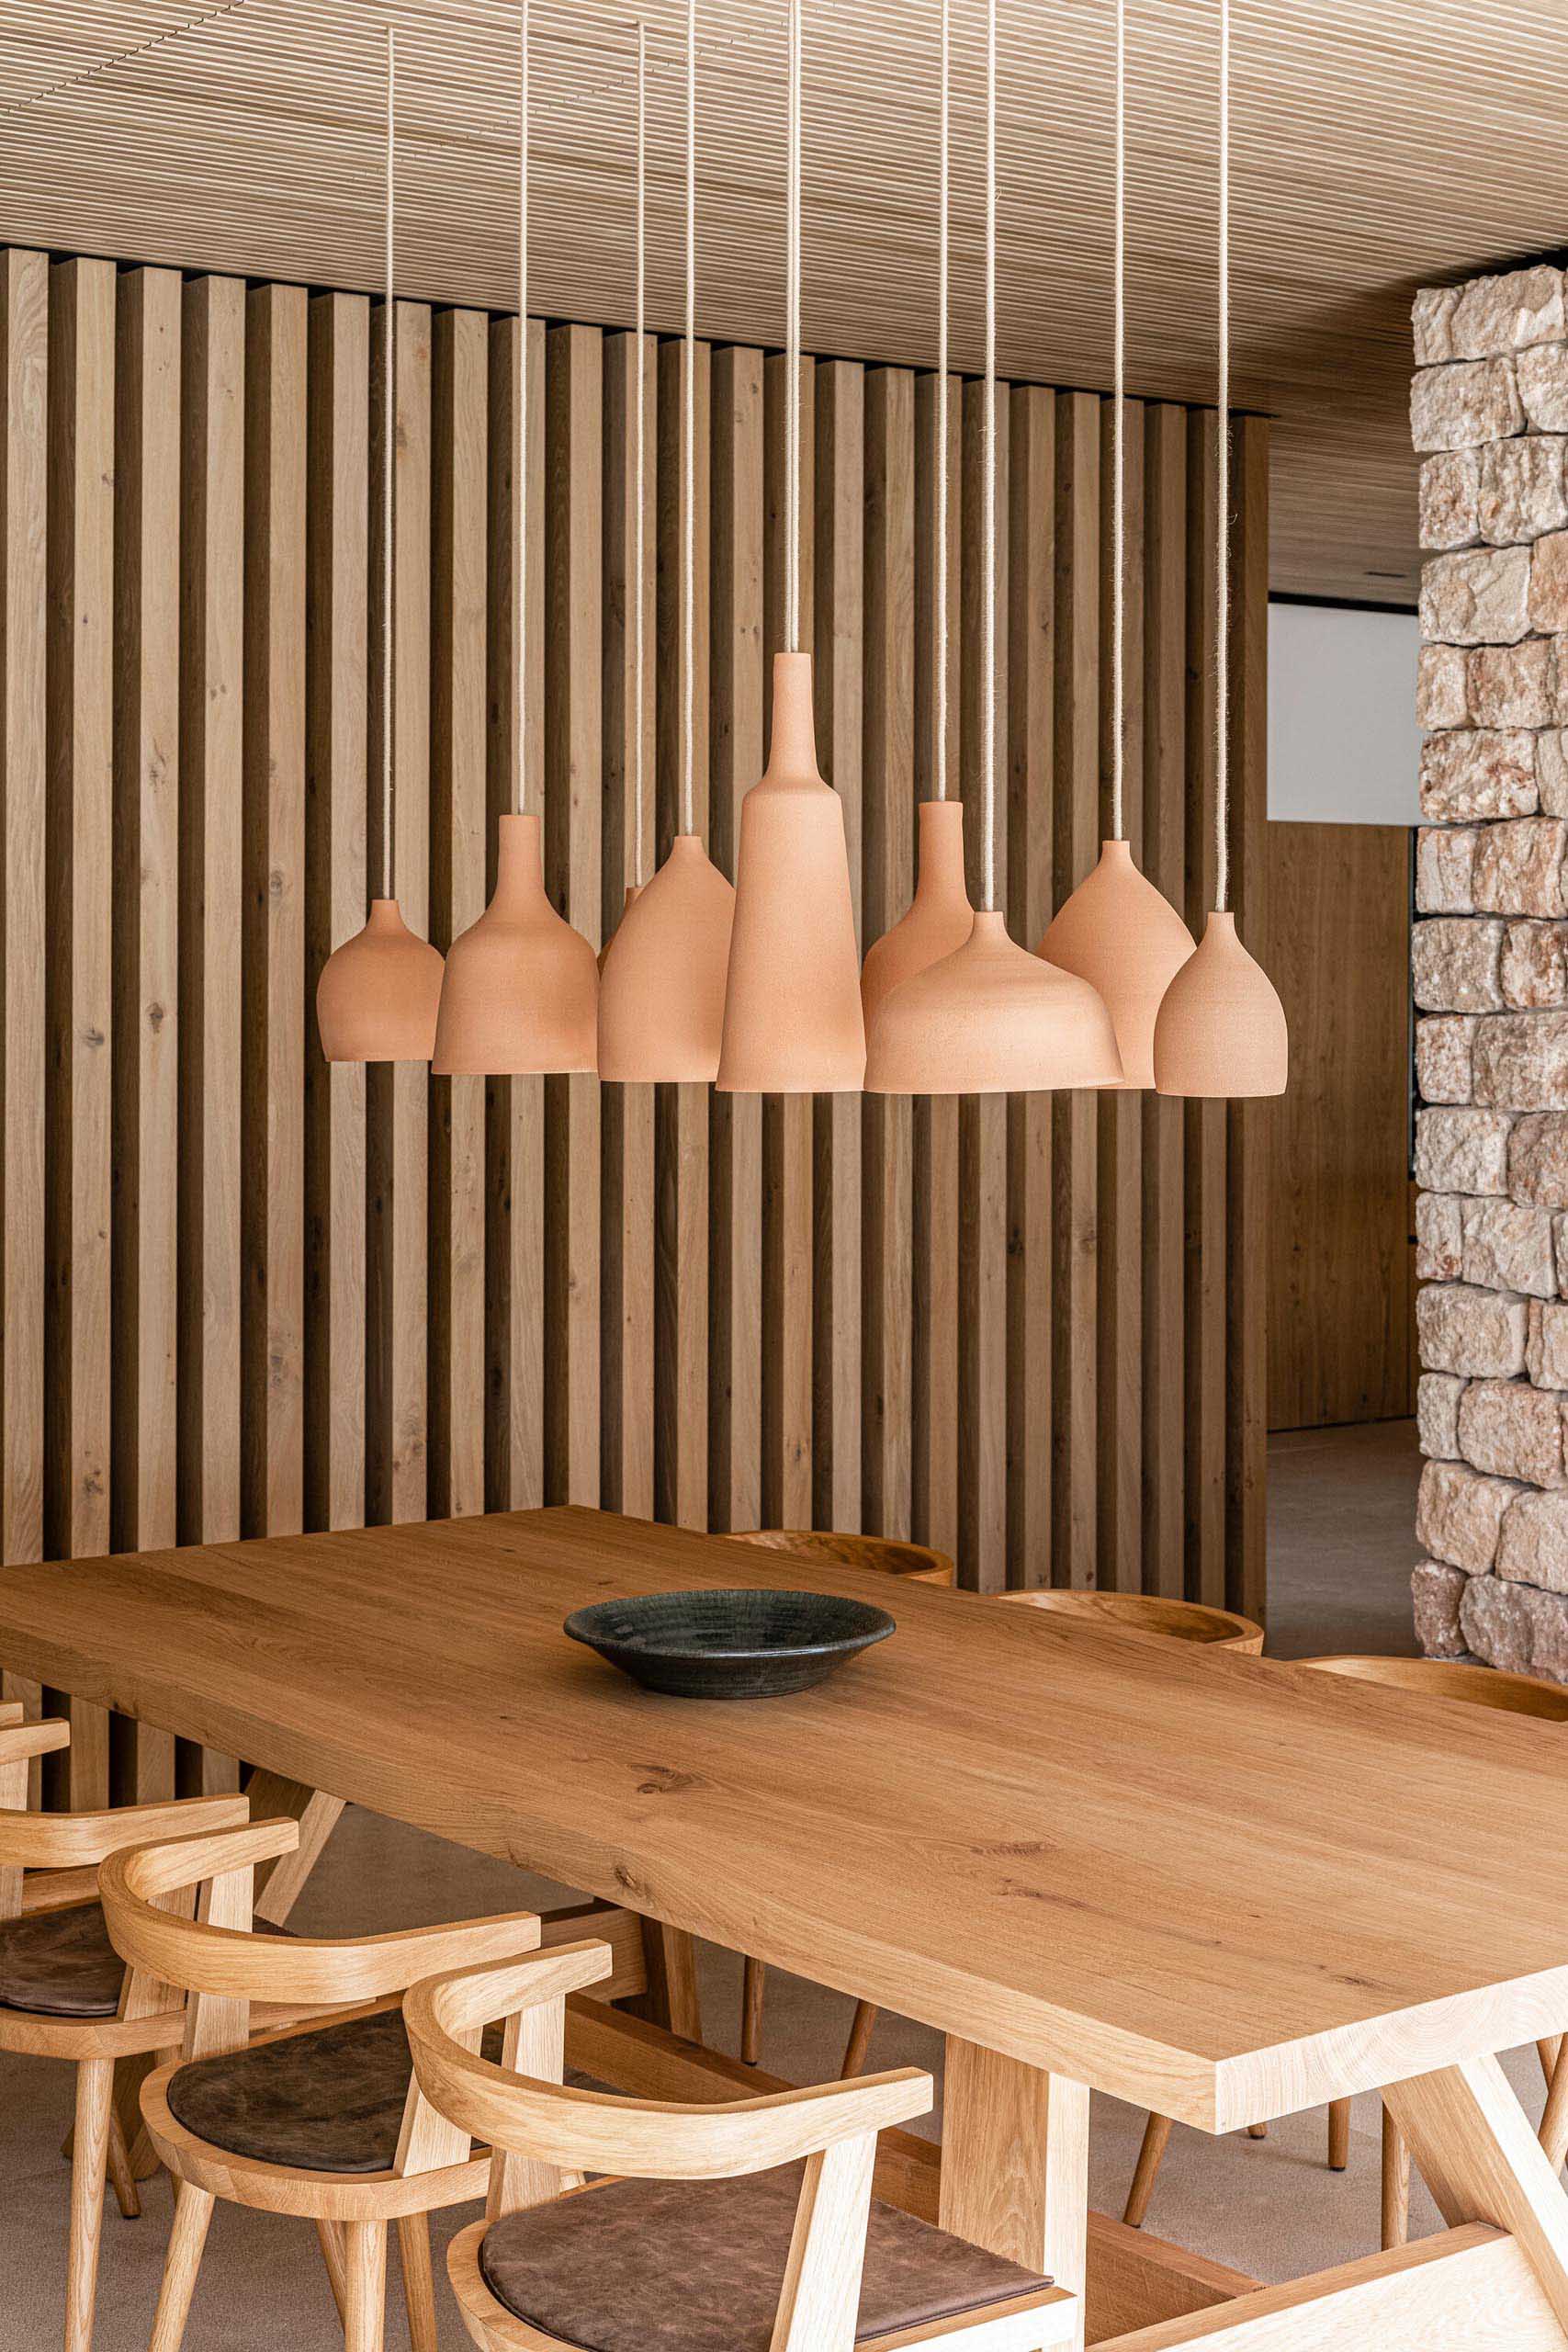 A group of handmade ceramic pendant lights create a focal point above the dining table.